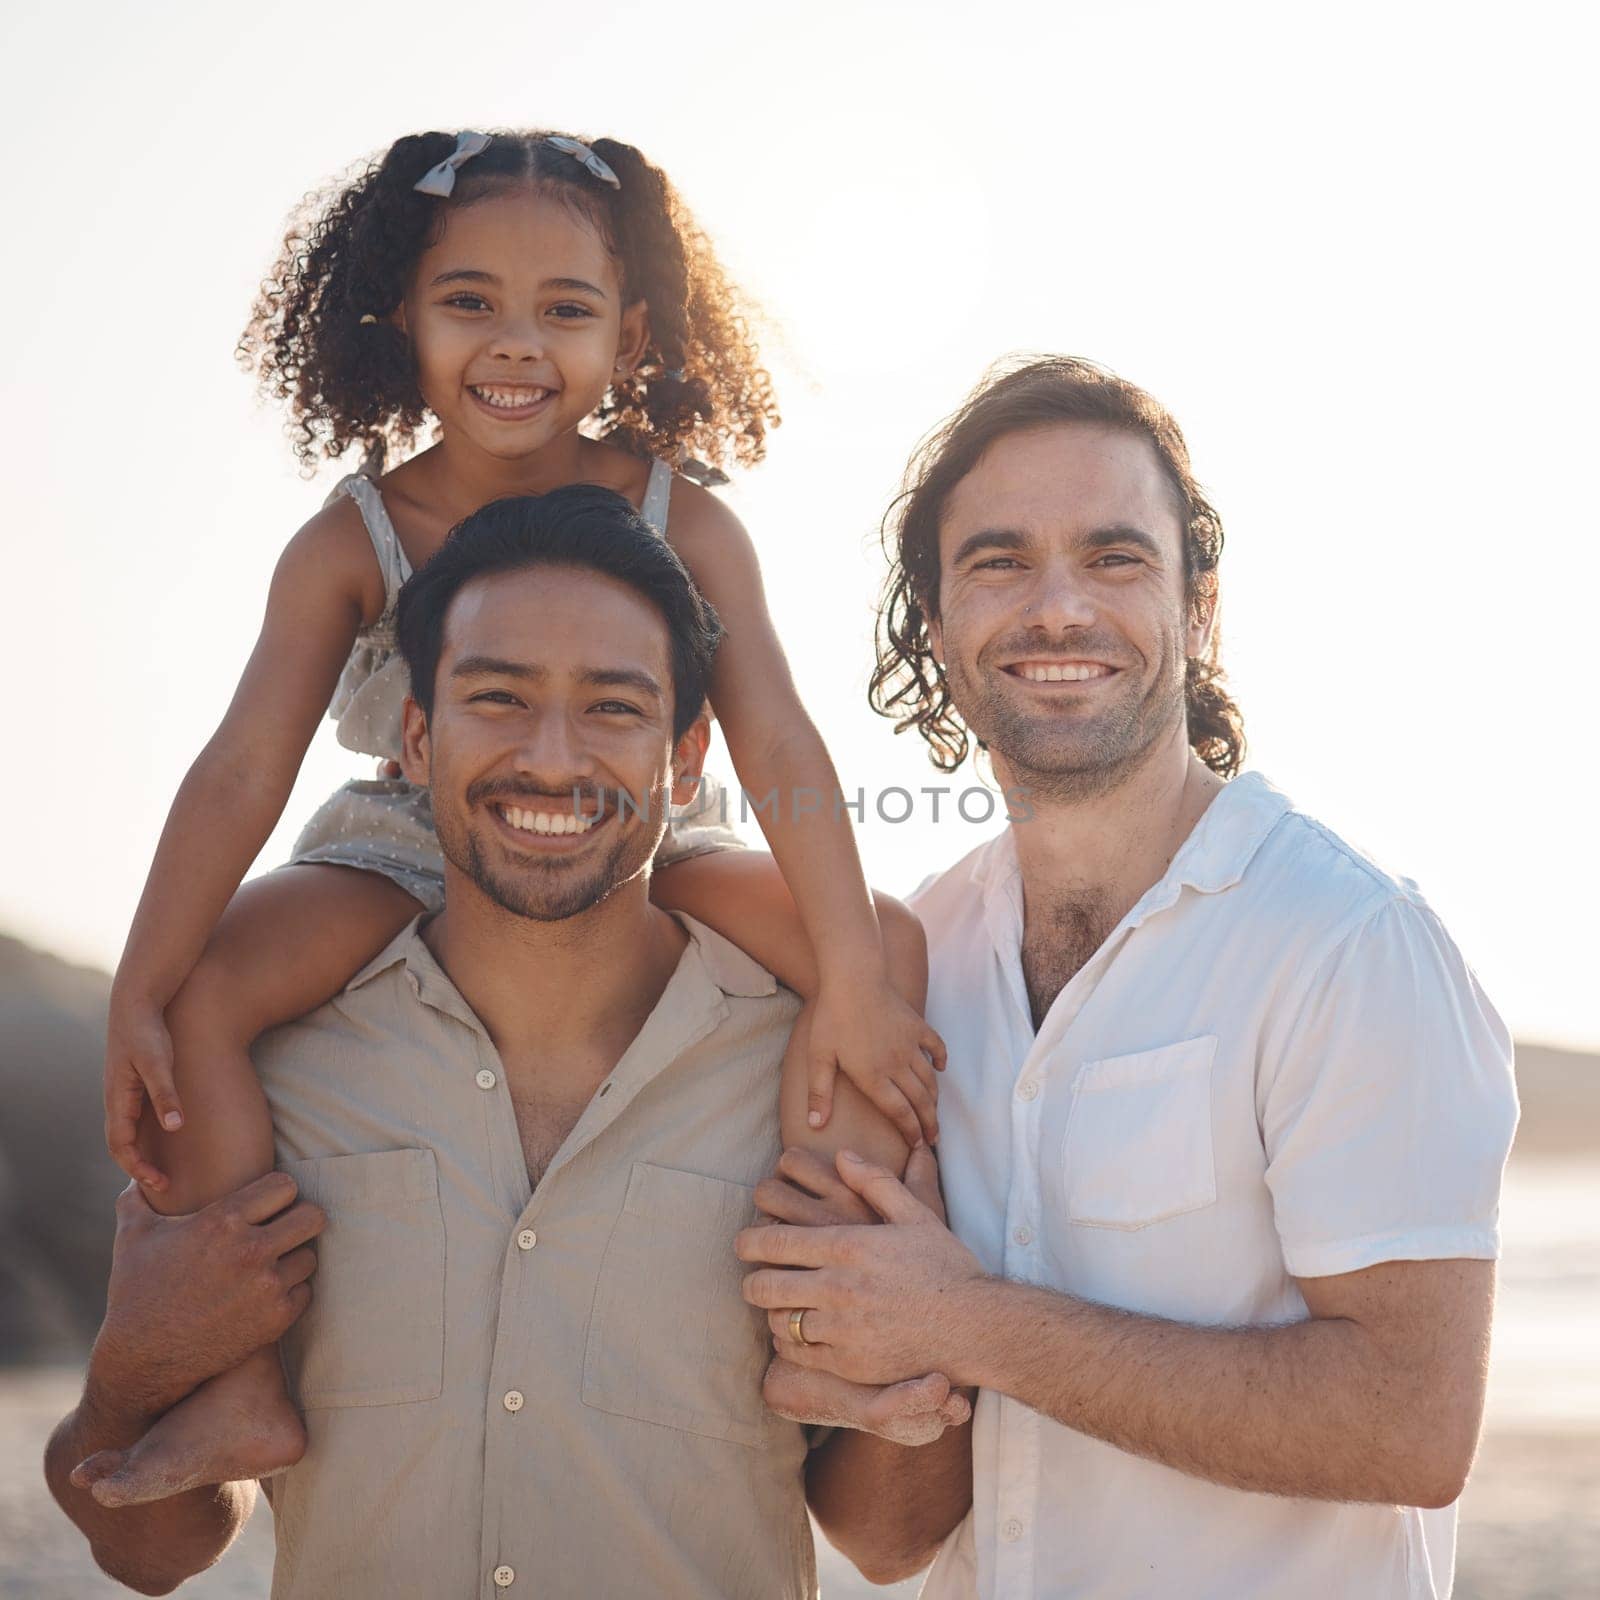 Gay couple, portrait and smile with family at beach for seaside holiday, support and travel. Summer, vacation and love with men and child in nature for lgbtq, happiness and bonding together.